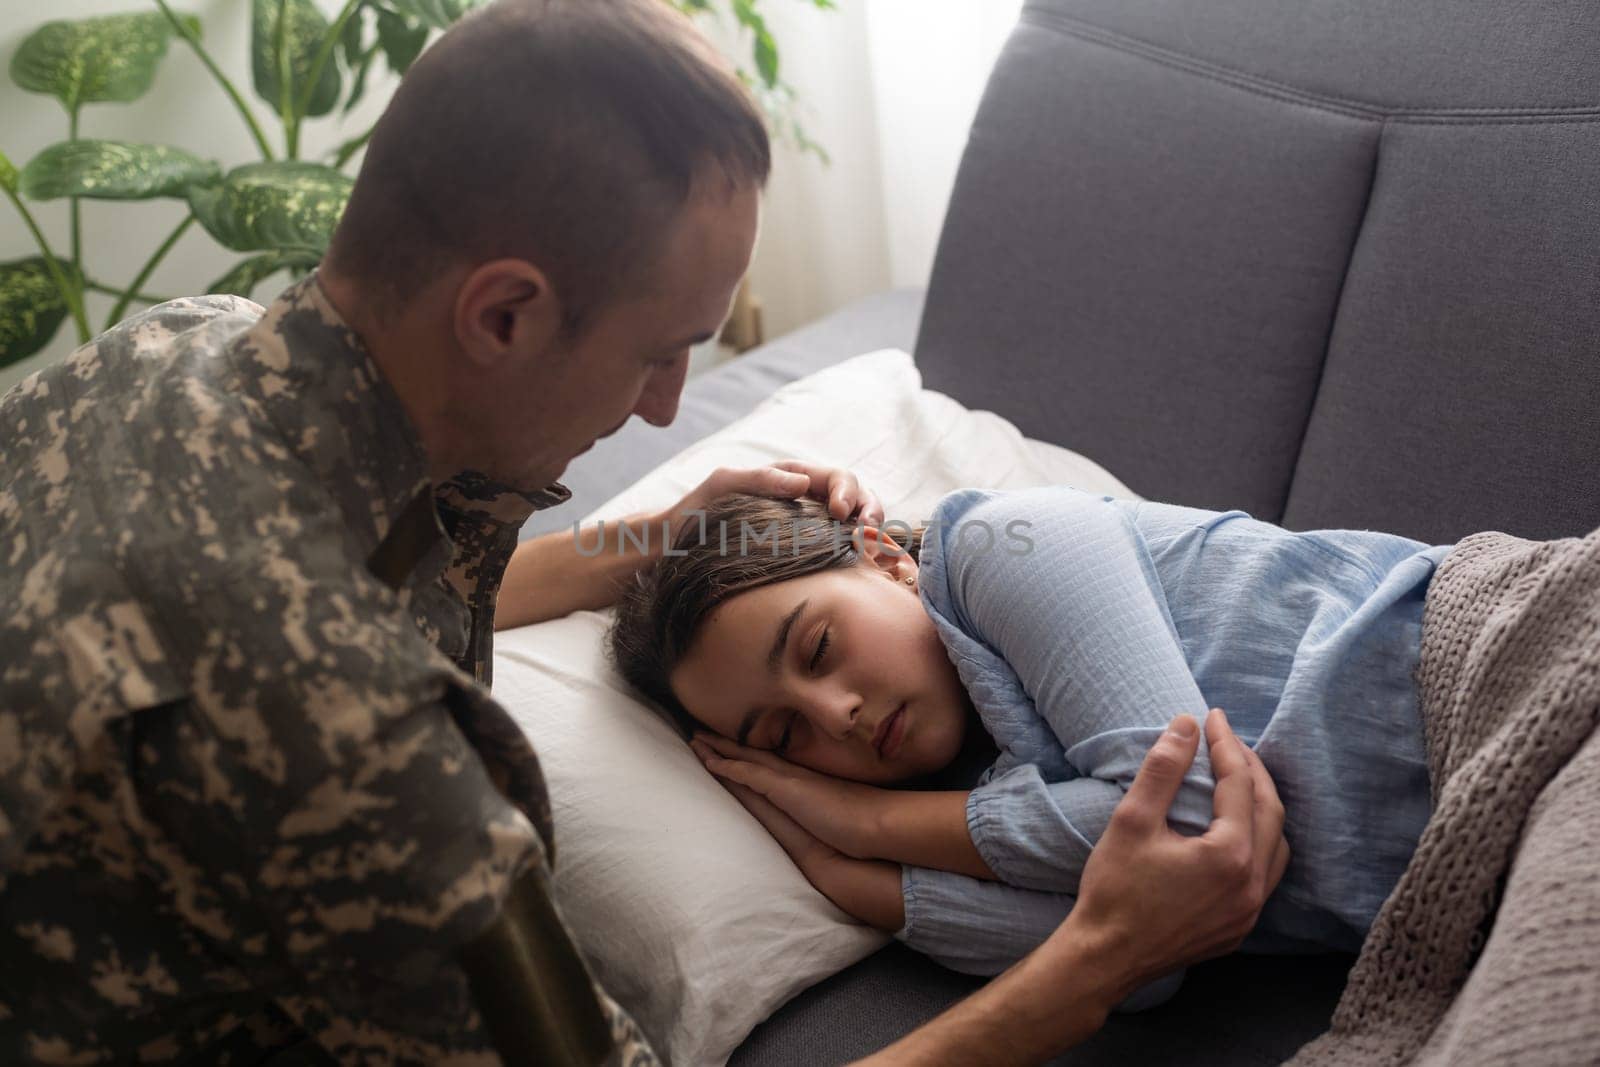 Soldier surprises the sleeping family with his arrival at home. by Andelov13